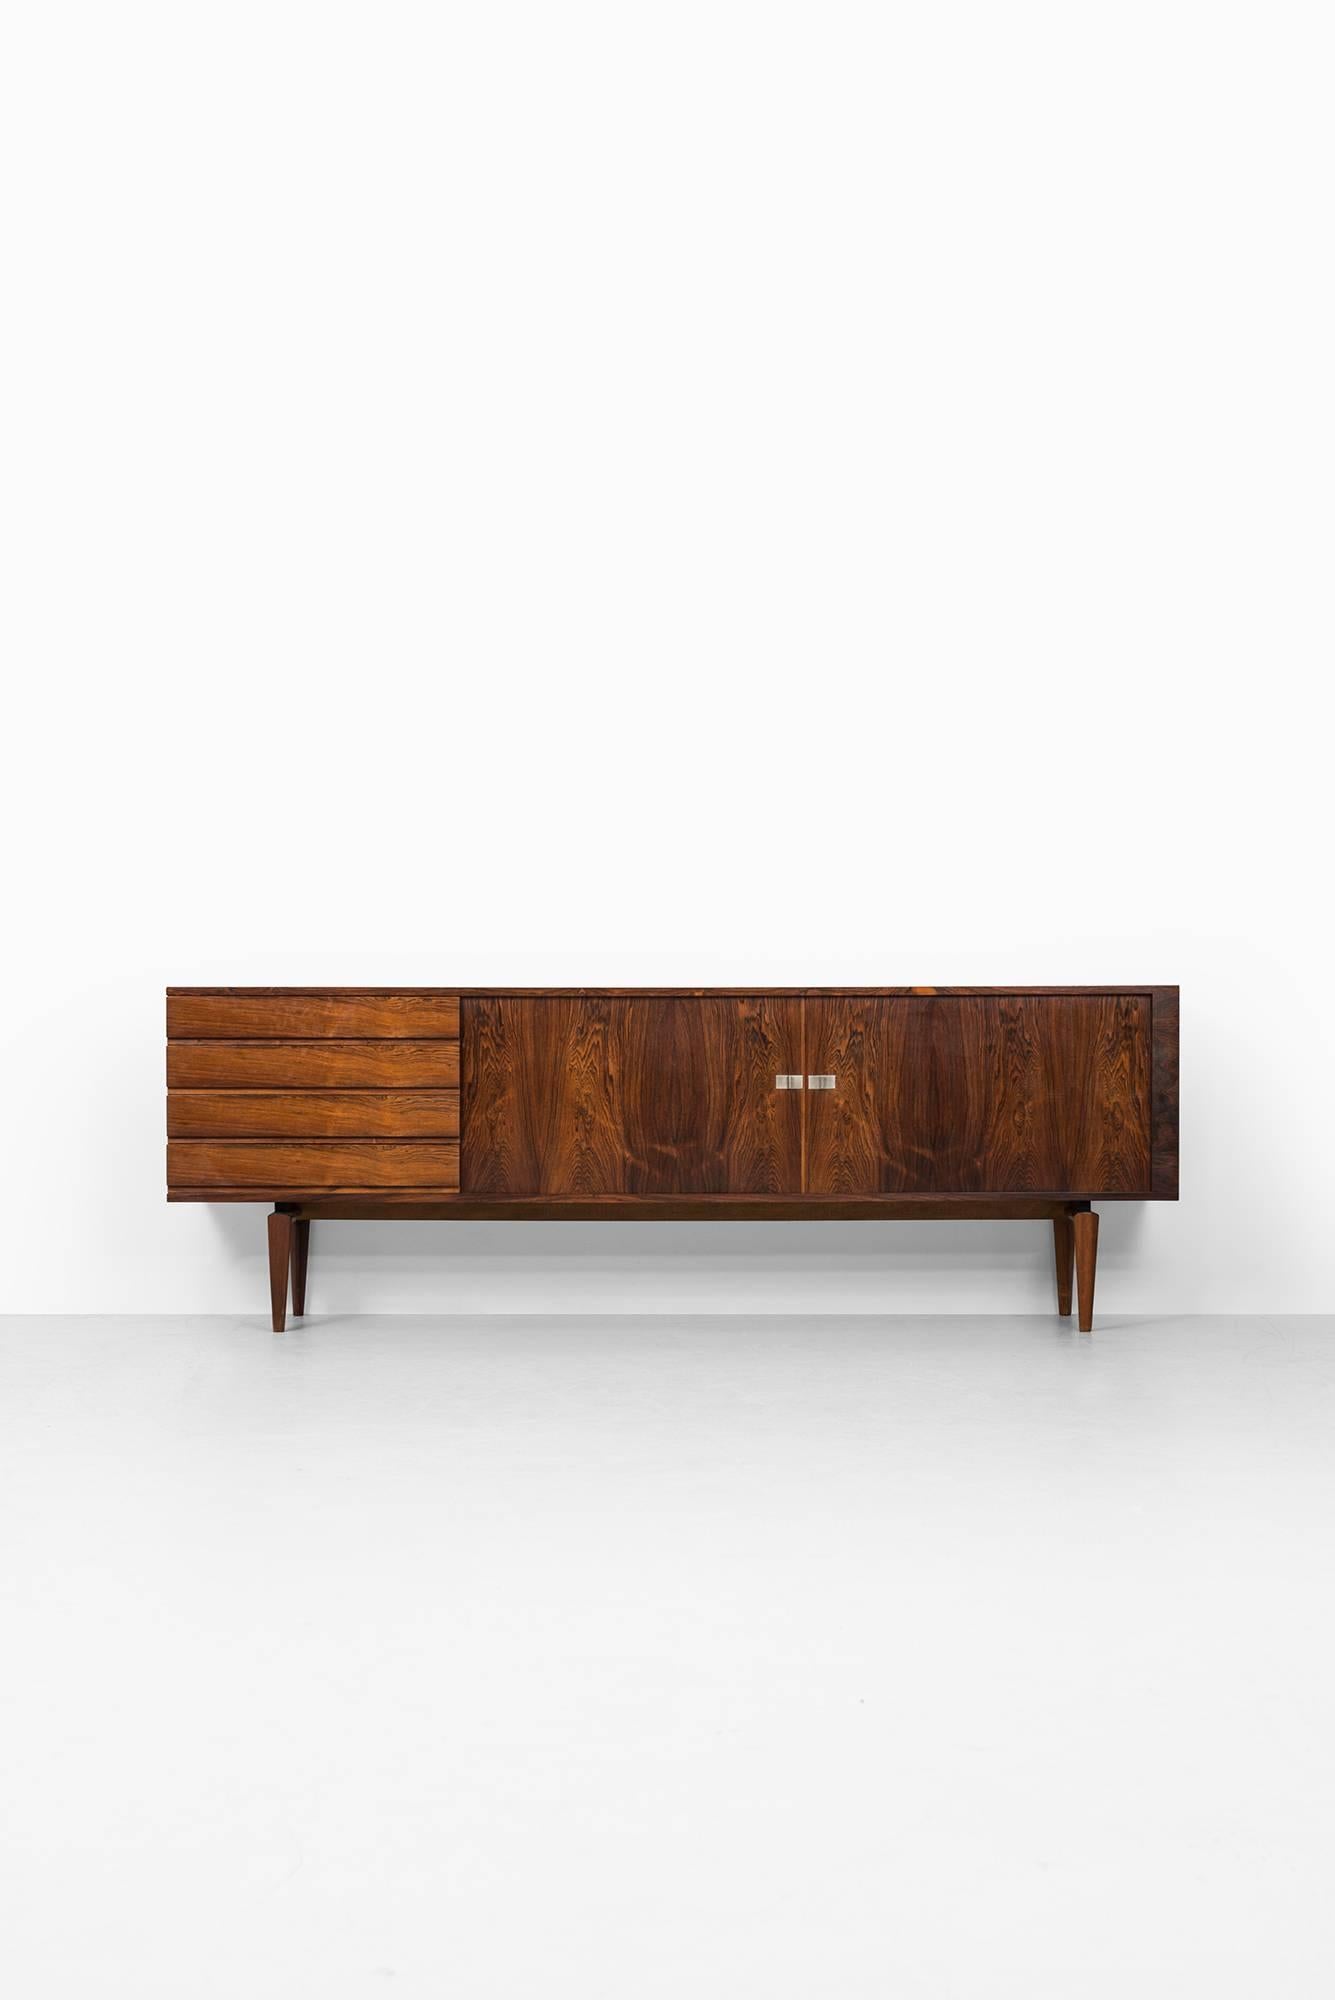 Very rare sideboard designed by Henry W. Klein. Produced by Bramin in Denmark.